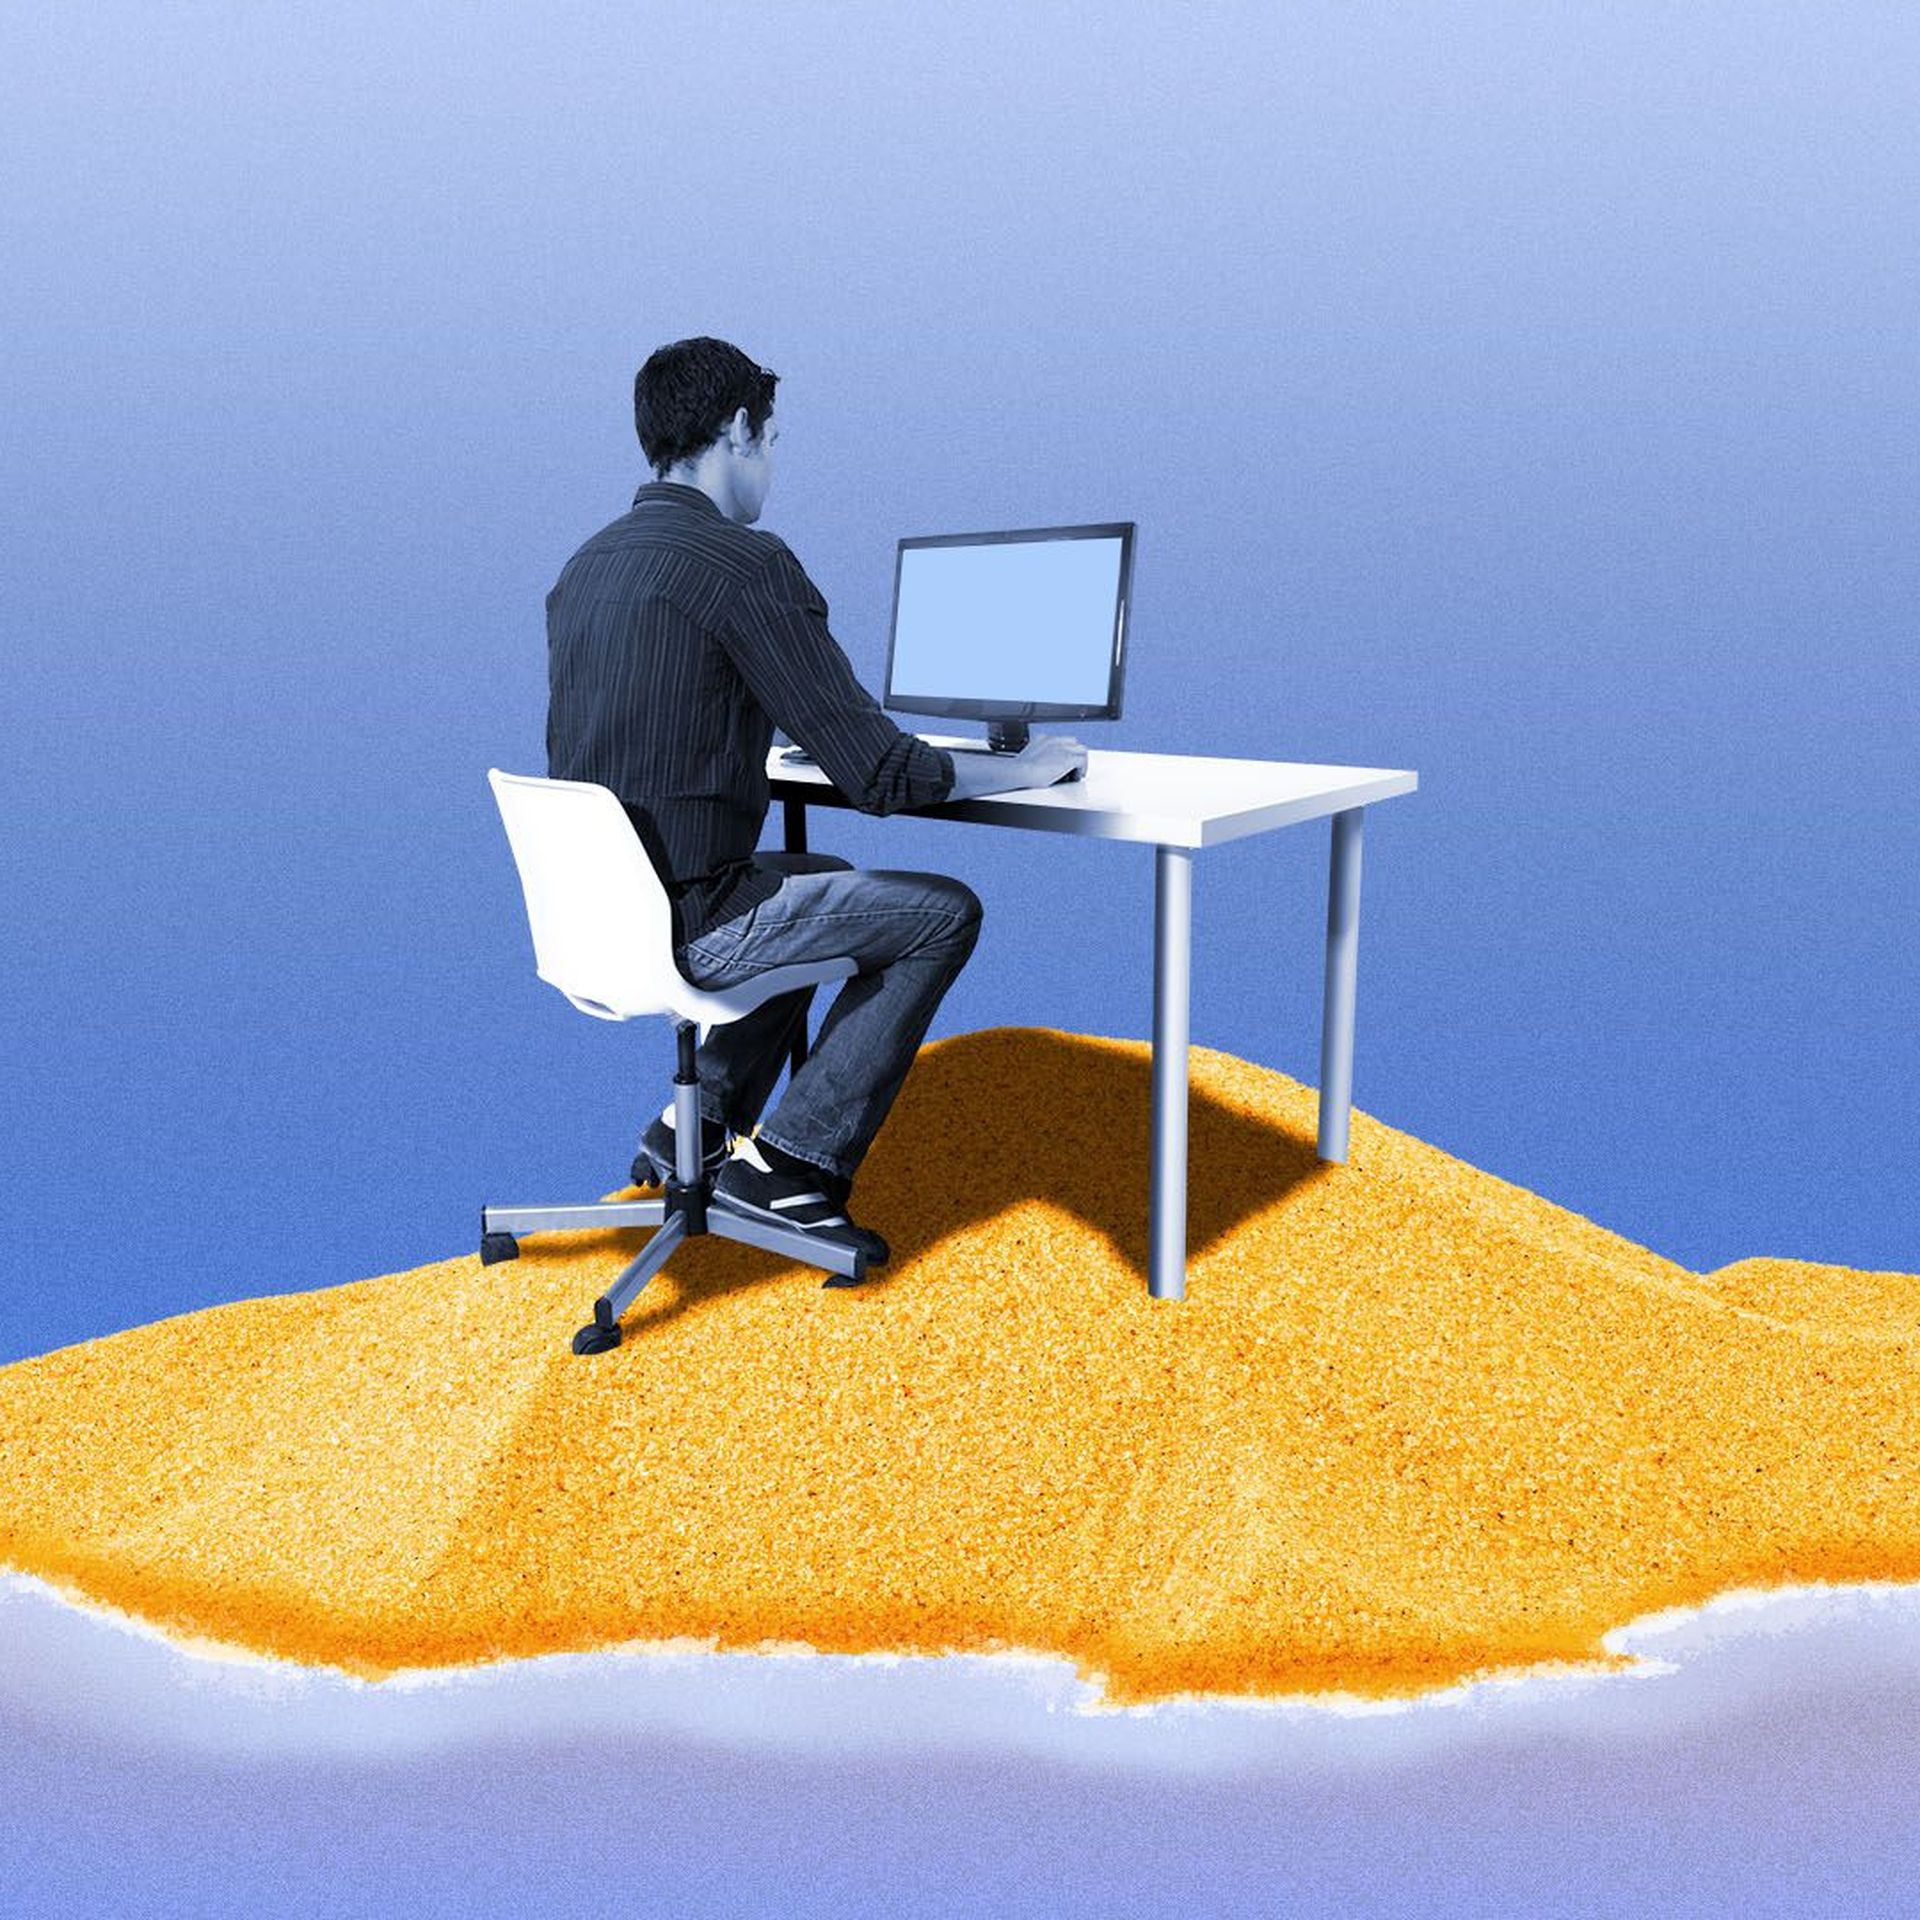 Illustration of a person working at a desk in the middle of a island